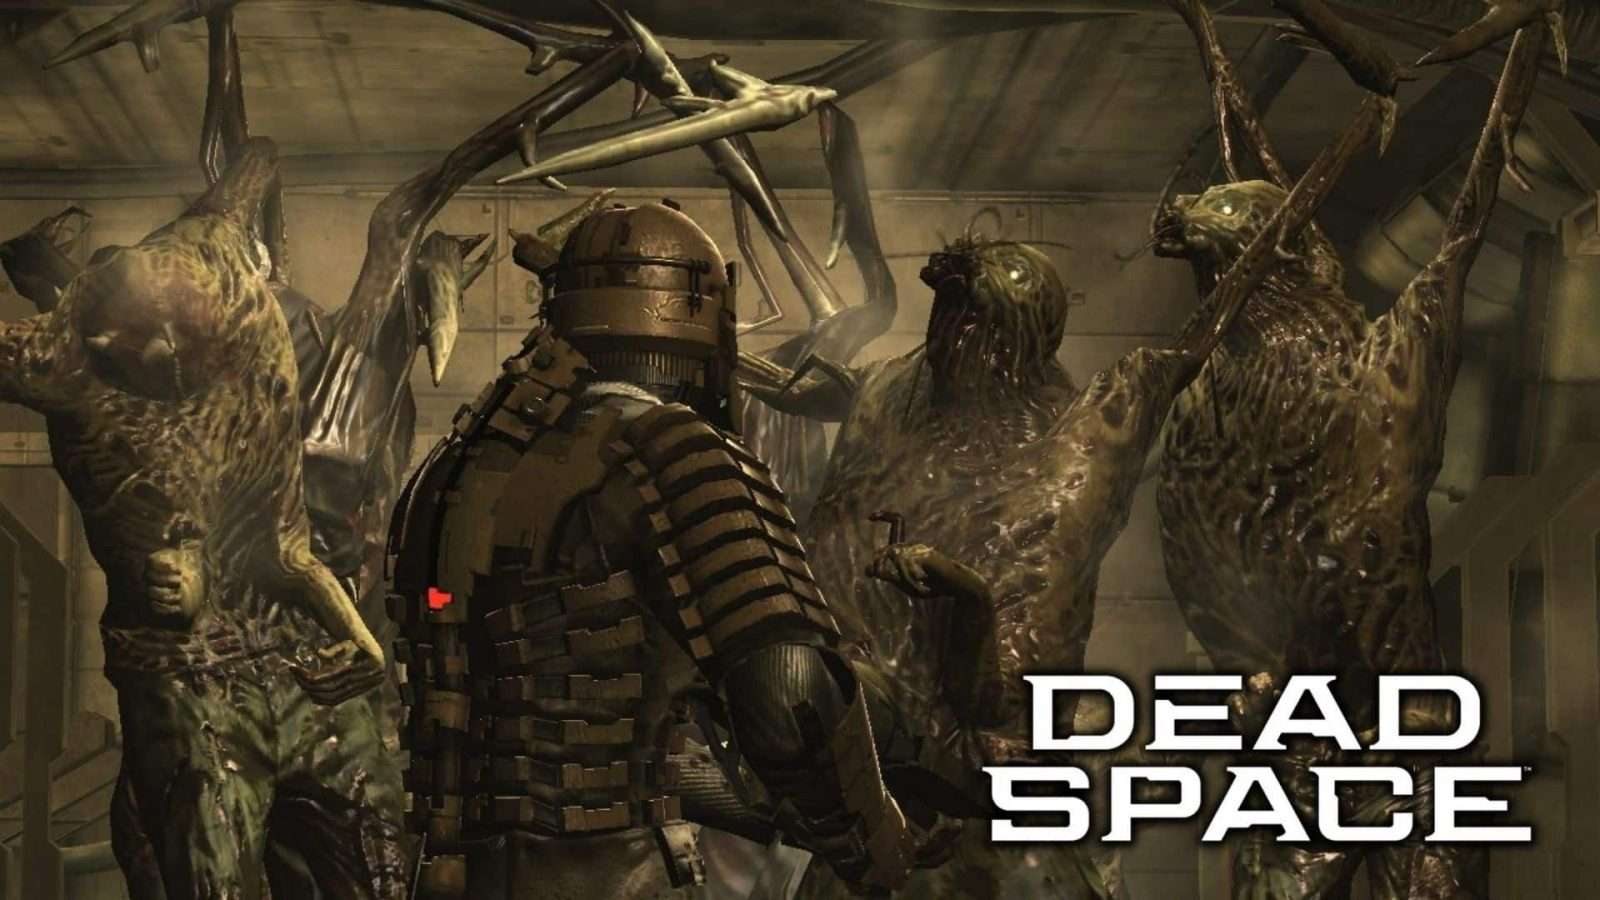 isaac clarke confronted by necromorphs in dead space remake